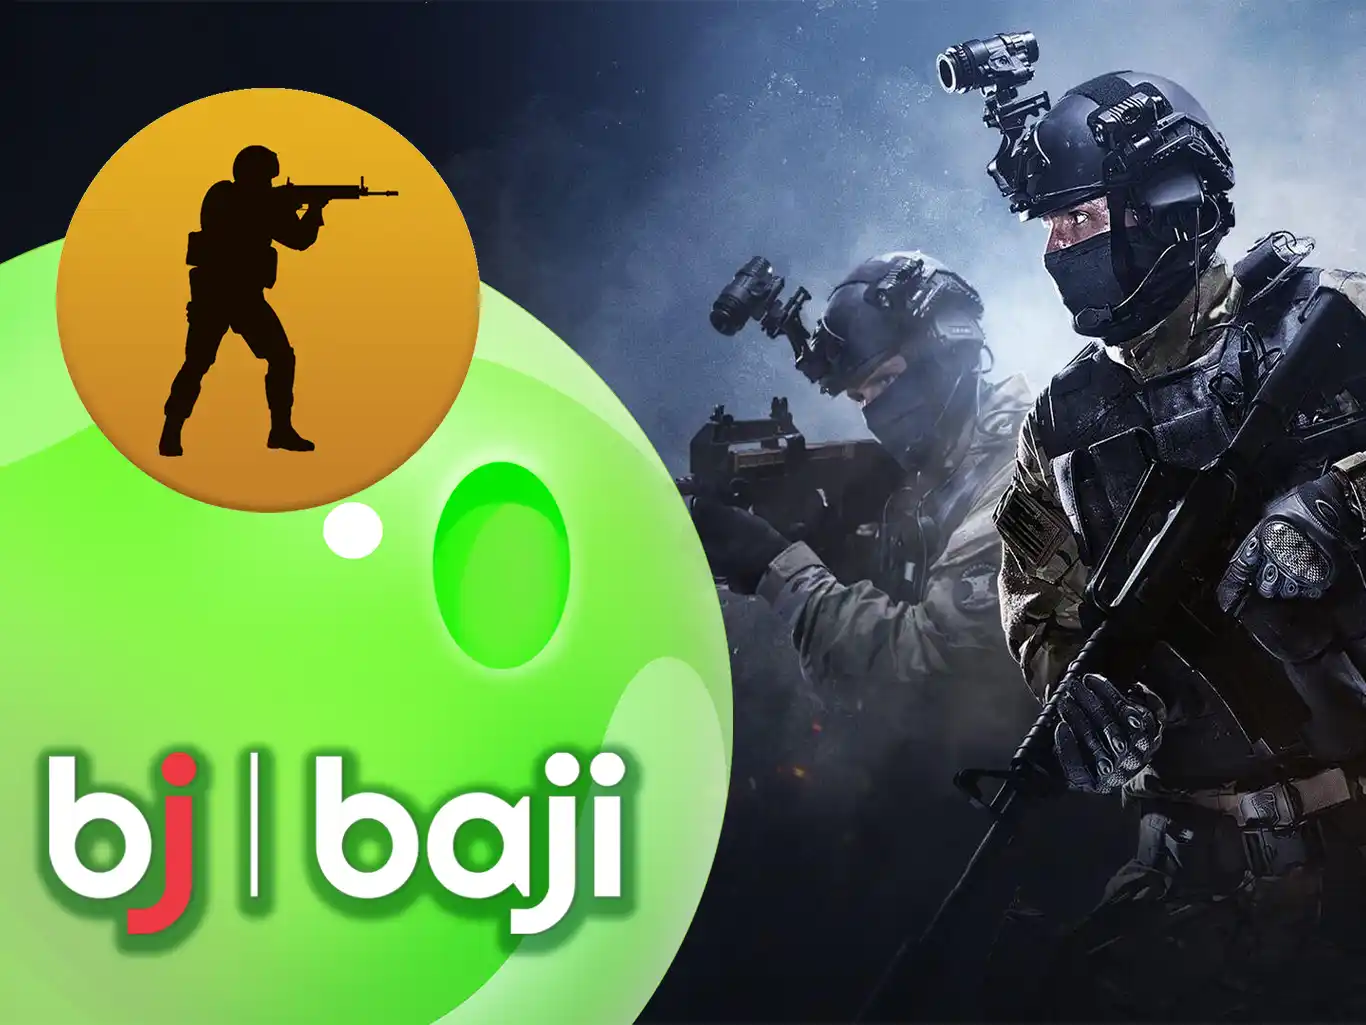 A huge number of matches will please fans of this shooter on the website and in the app of the company Baji.